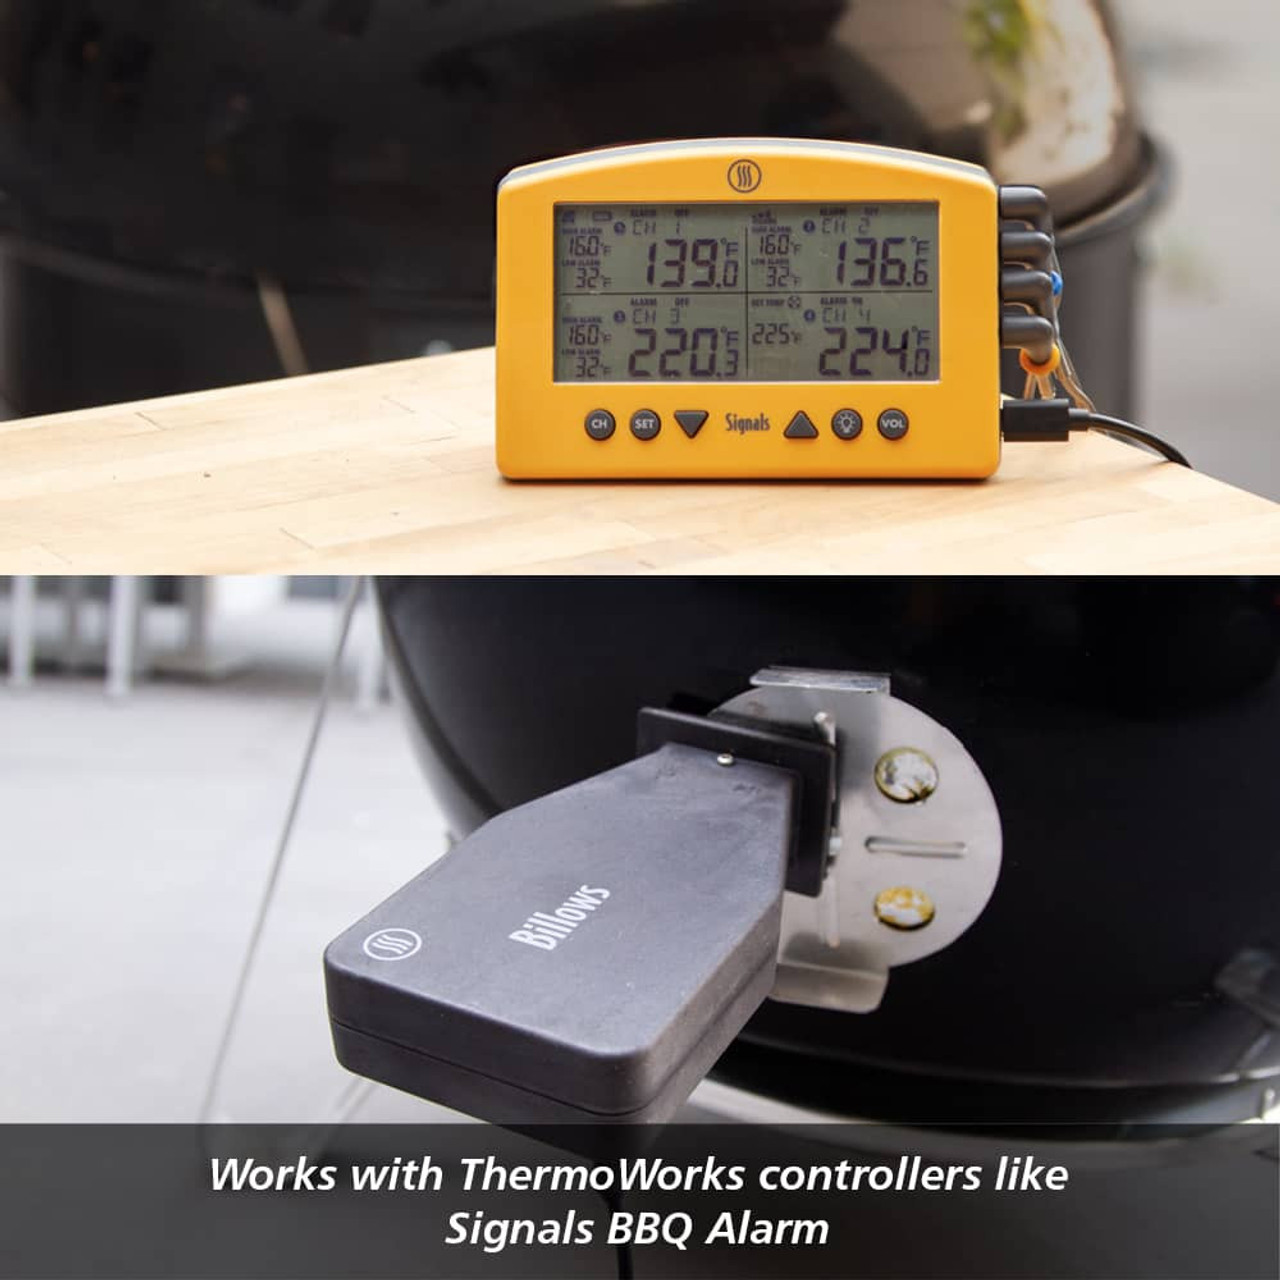 ThermoWorks Smoke and Smoke Gateway Review: Essentials for Your